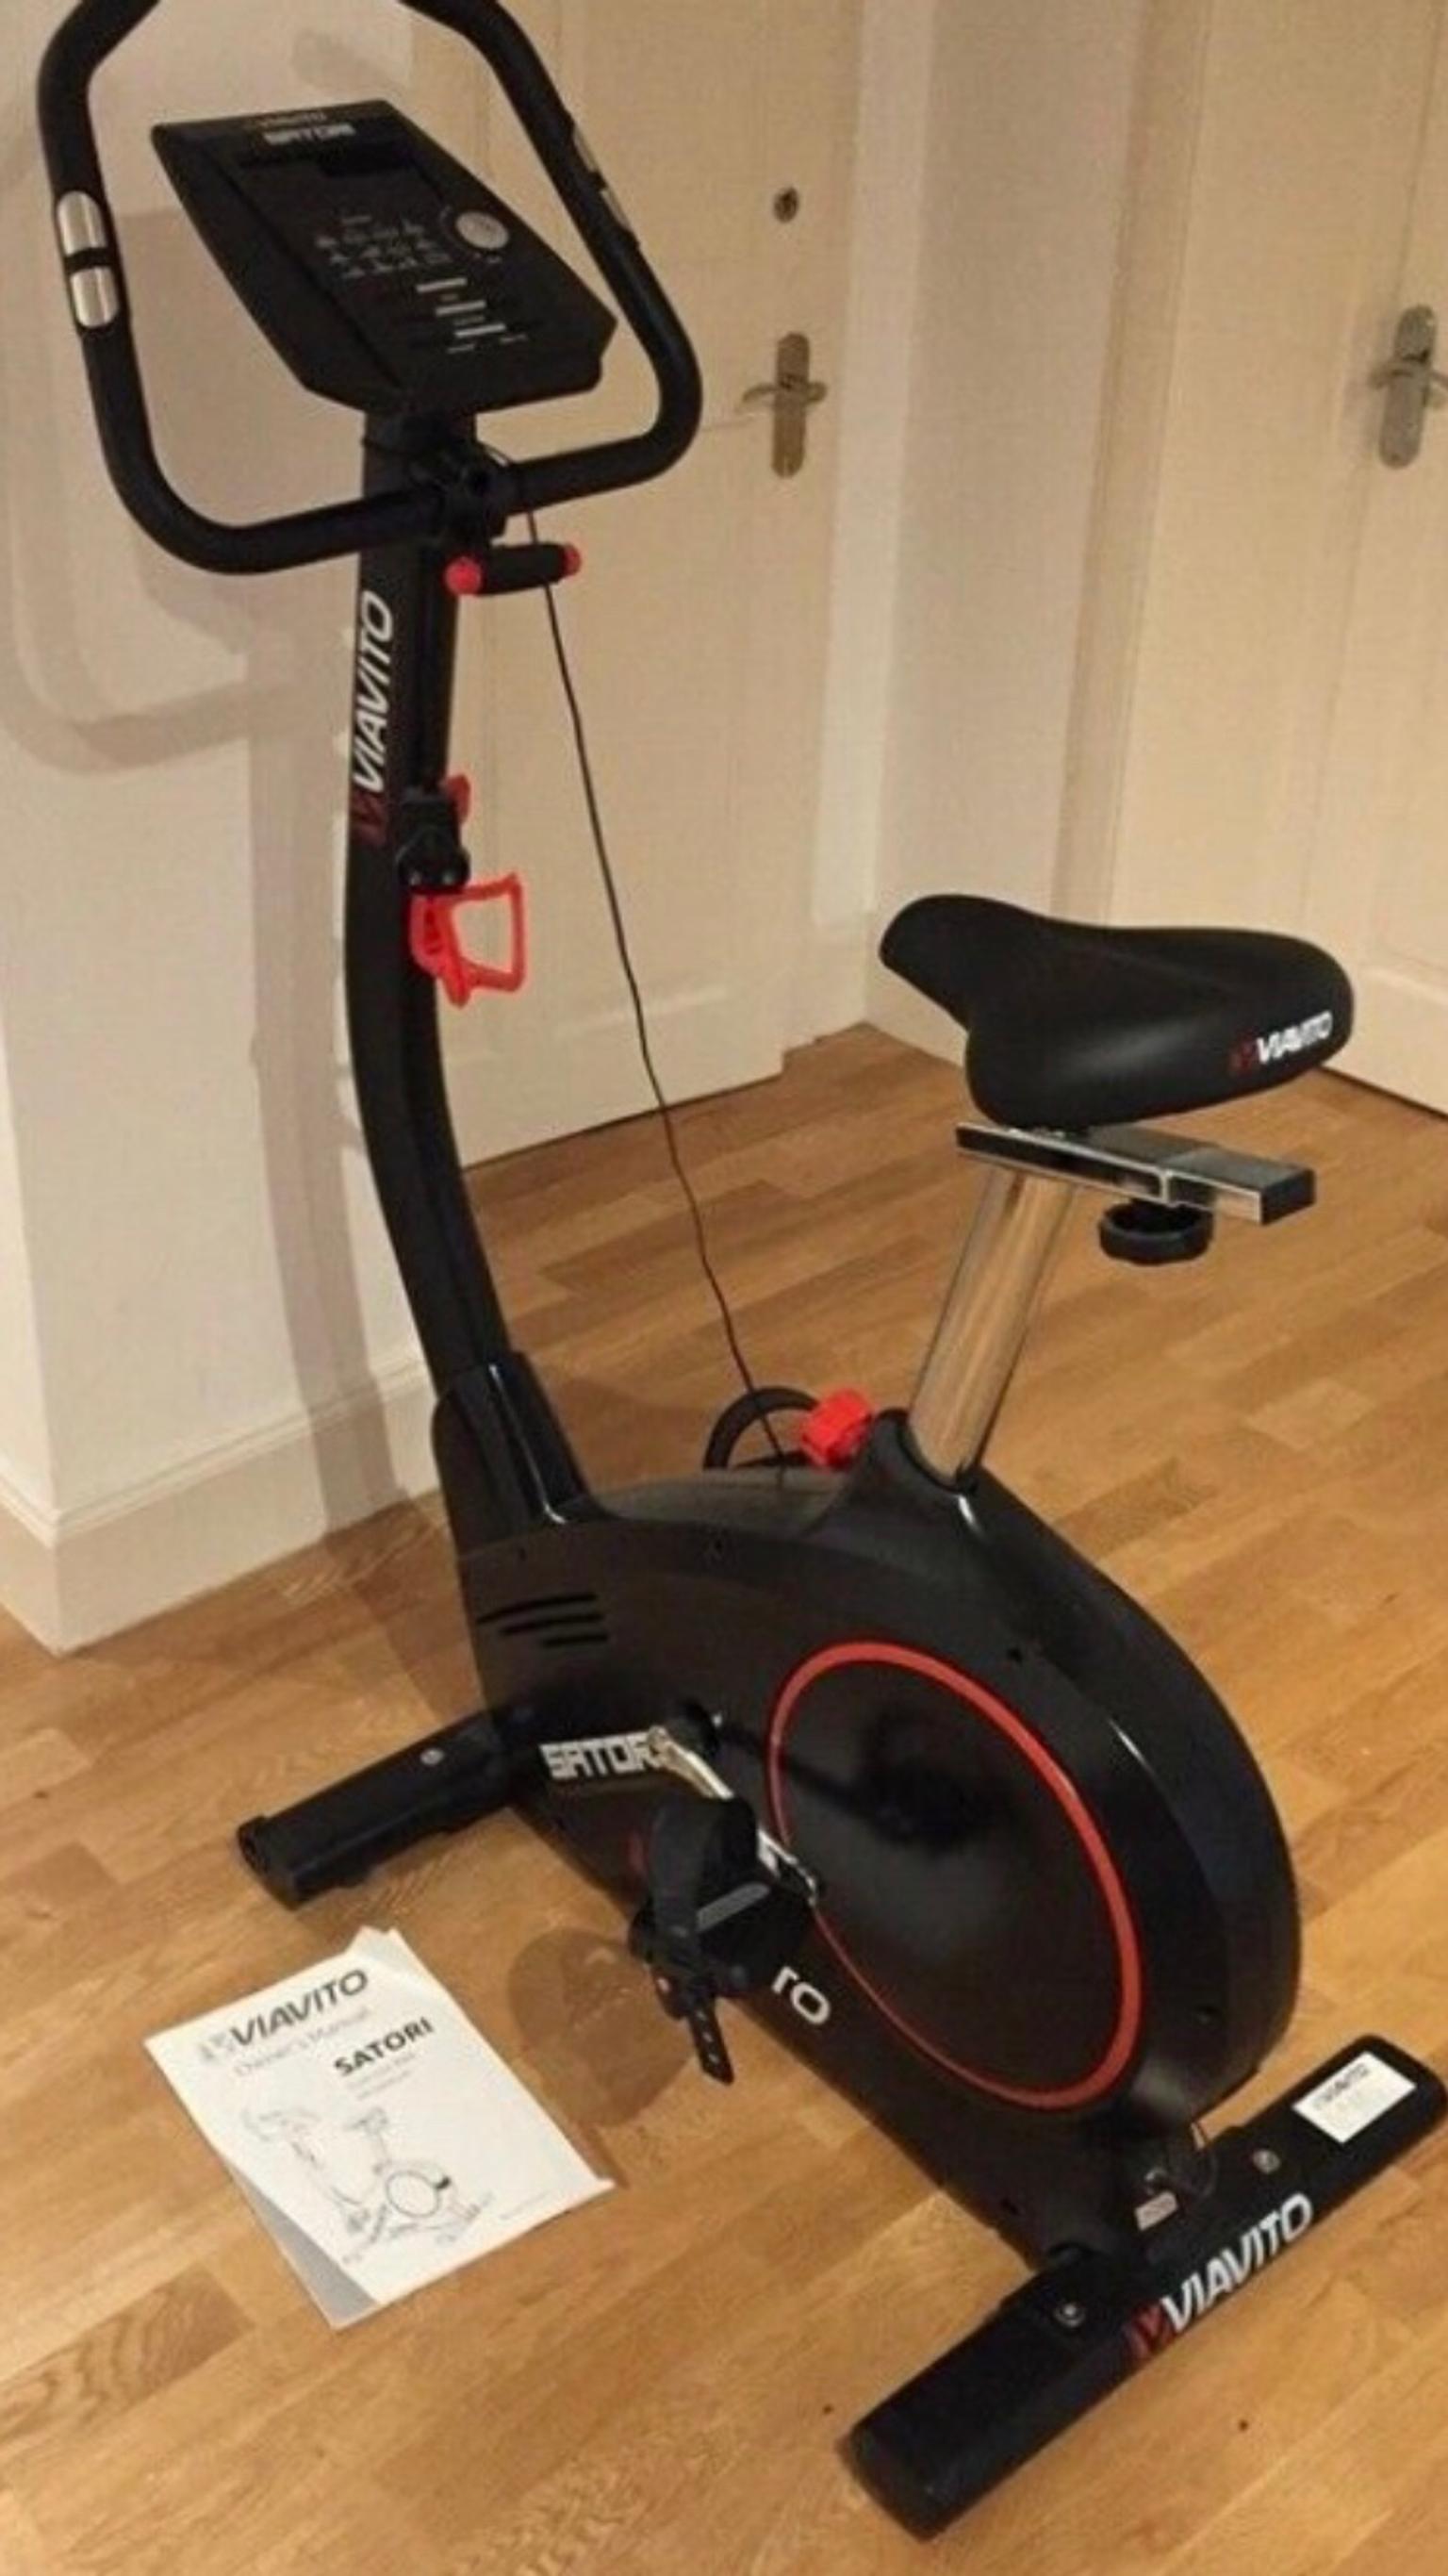 Quick Sale Lonsdale Exercise Bike In London Borough Of Barking And